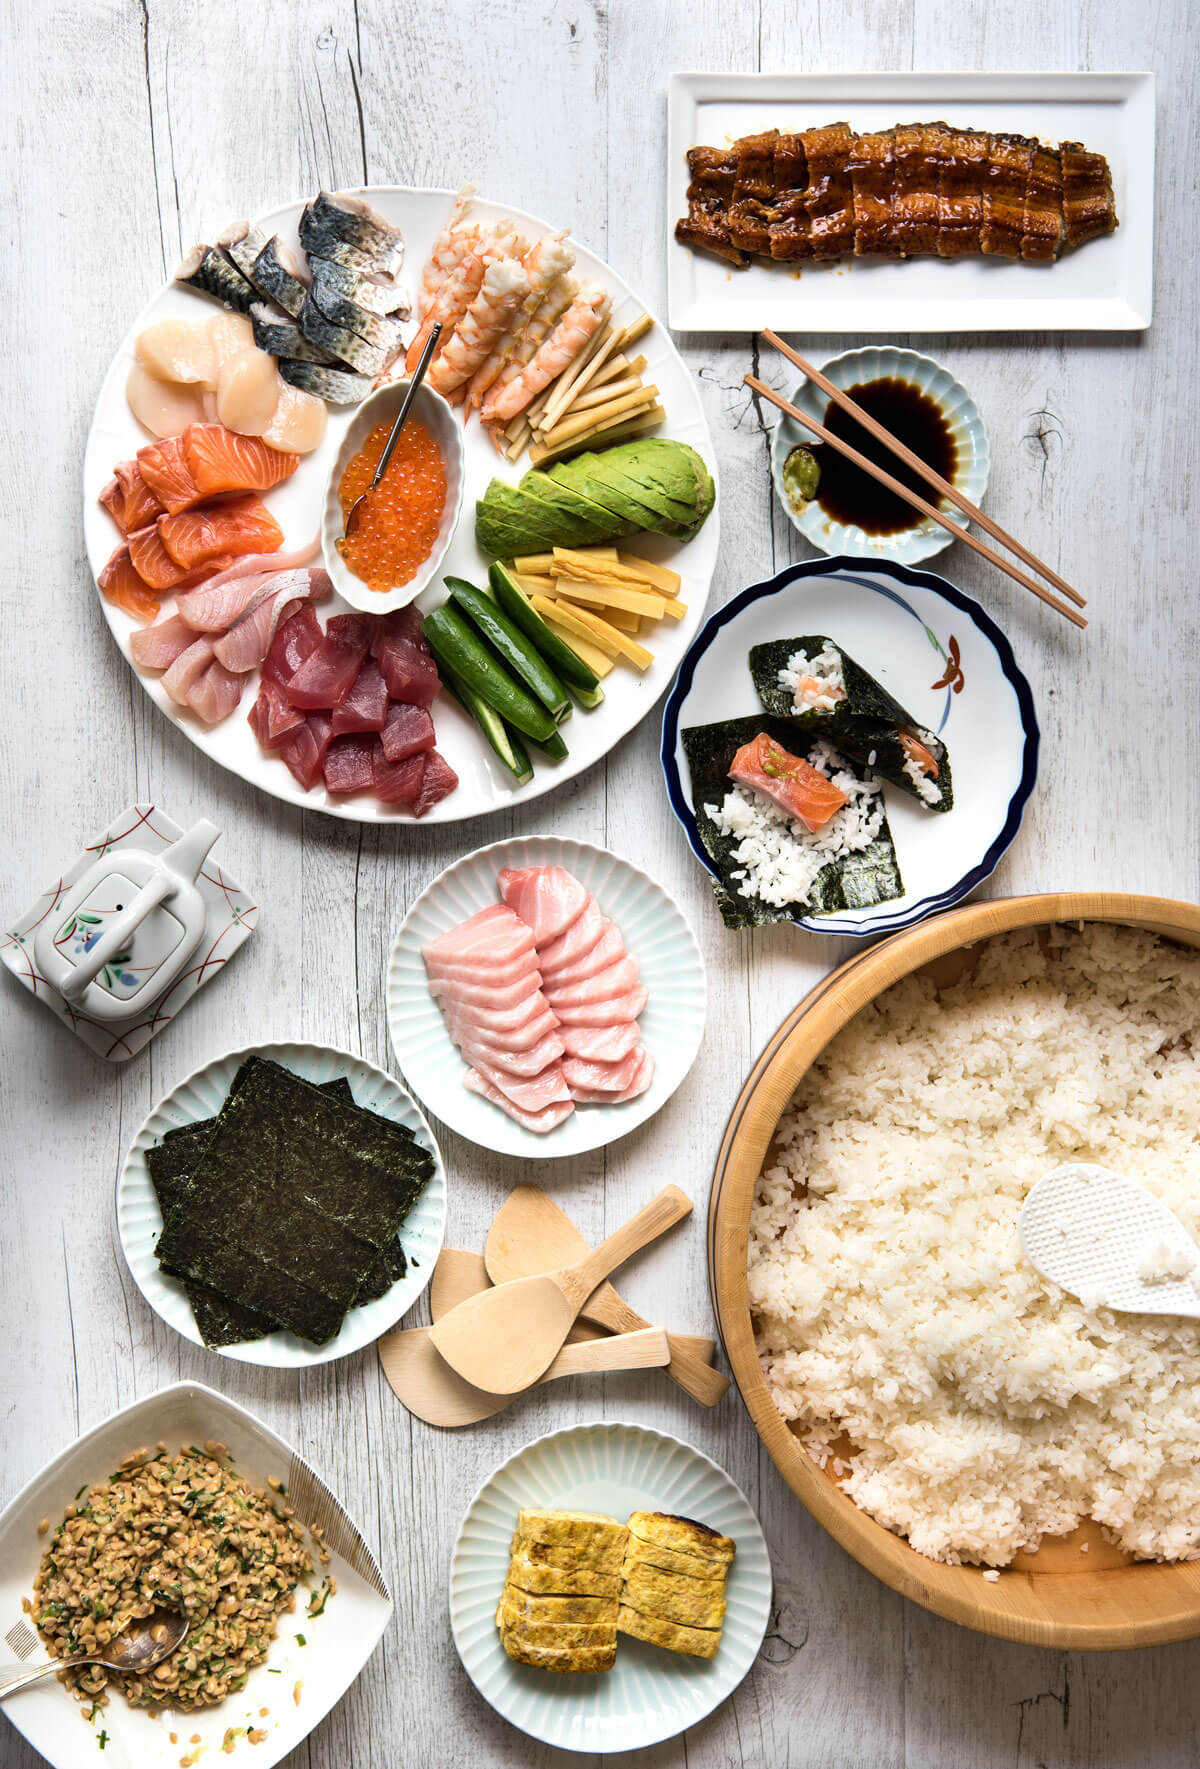 Home-made temakizushi (手巻き寿司) looks fancy but is very easy to prepare Cut the sushi fillings, display everything on the table and let the crowd serve themselves. It is fun and great for a little party with family and friends.